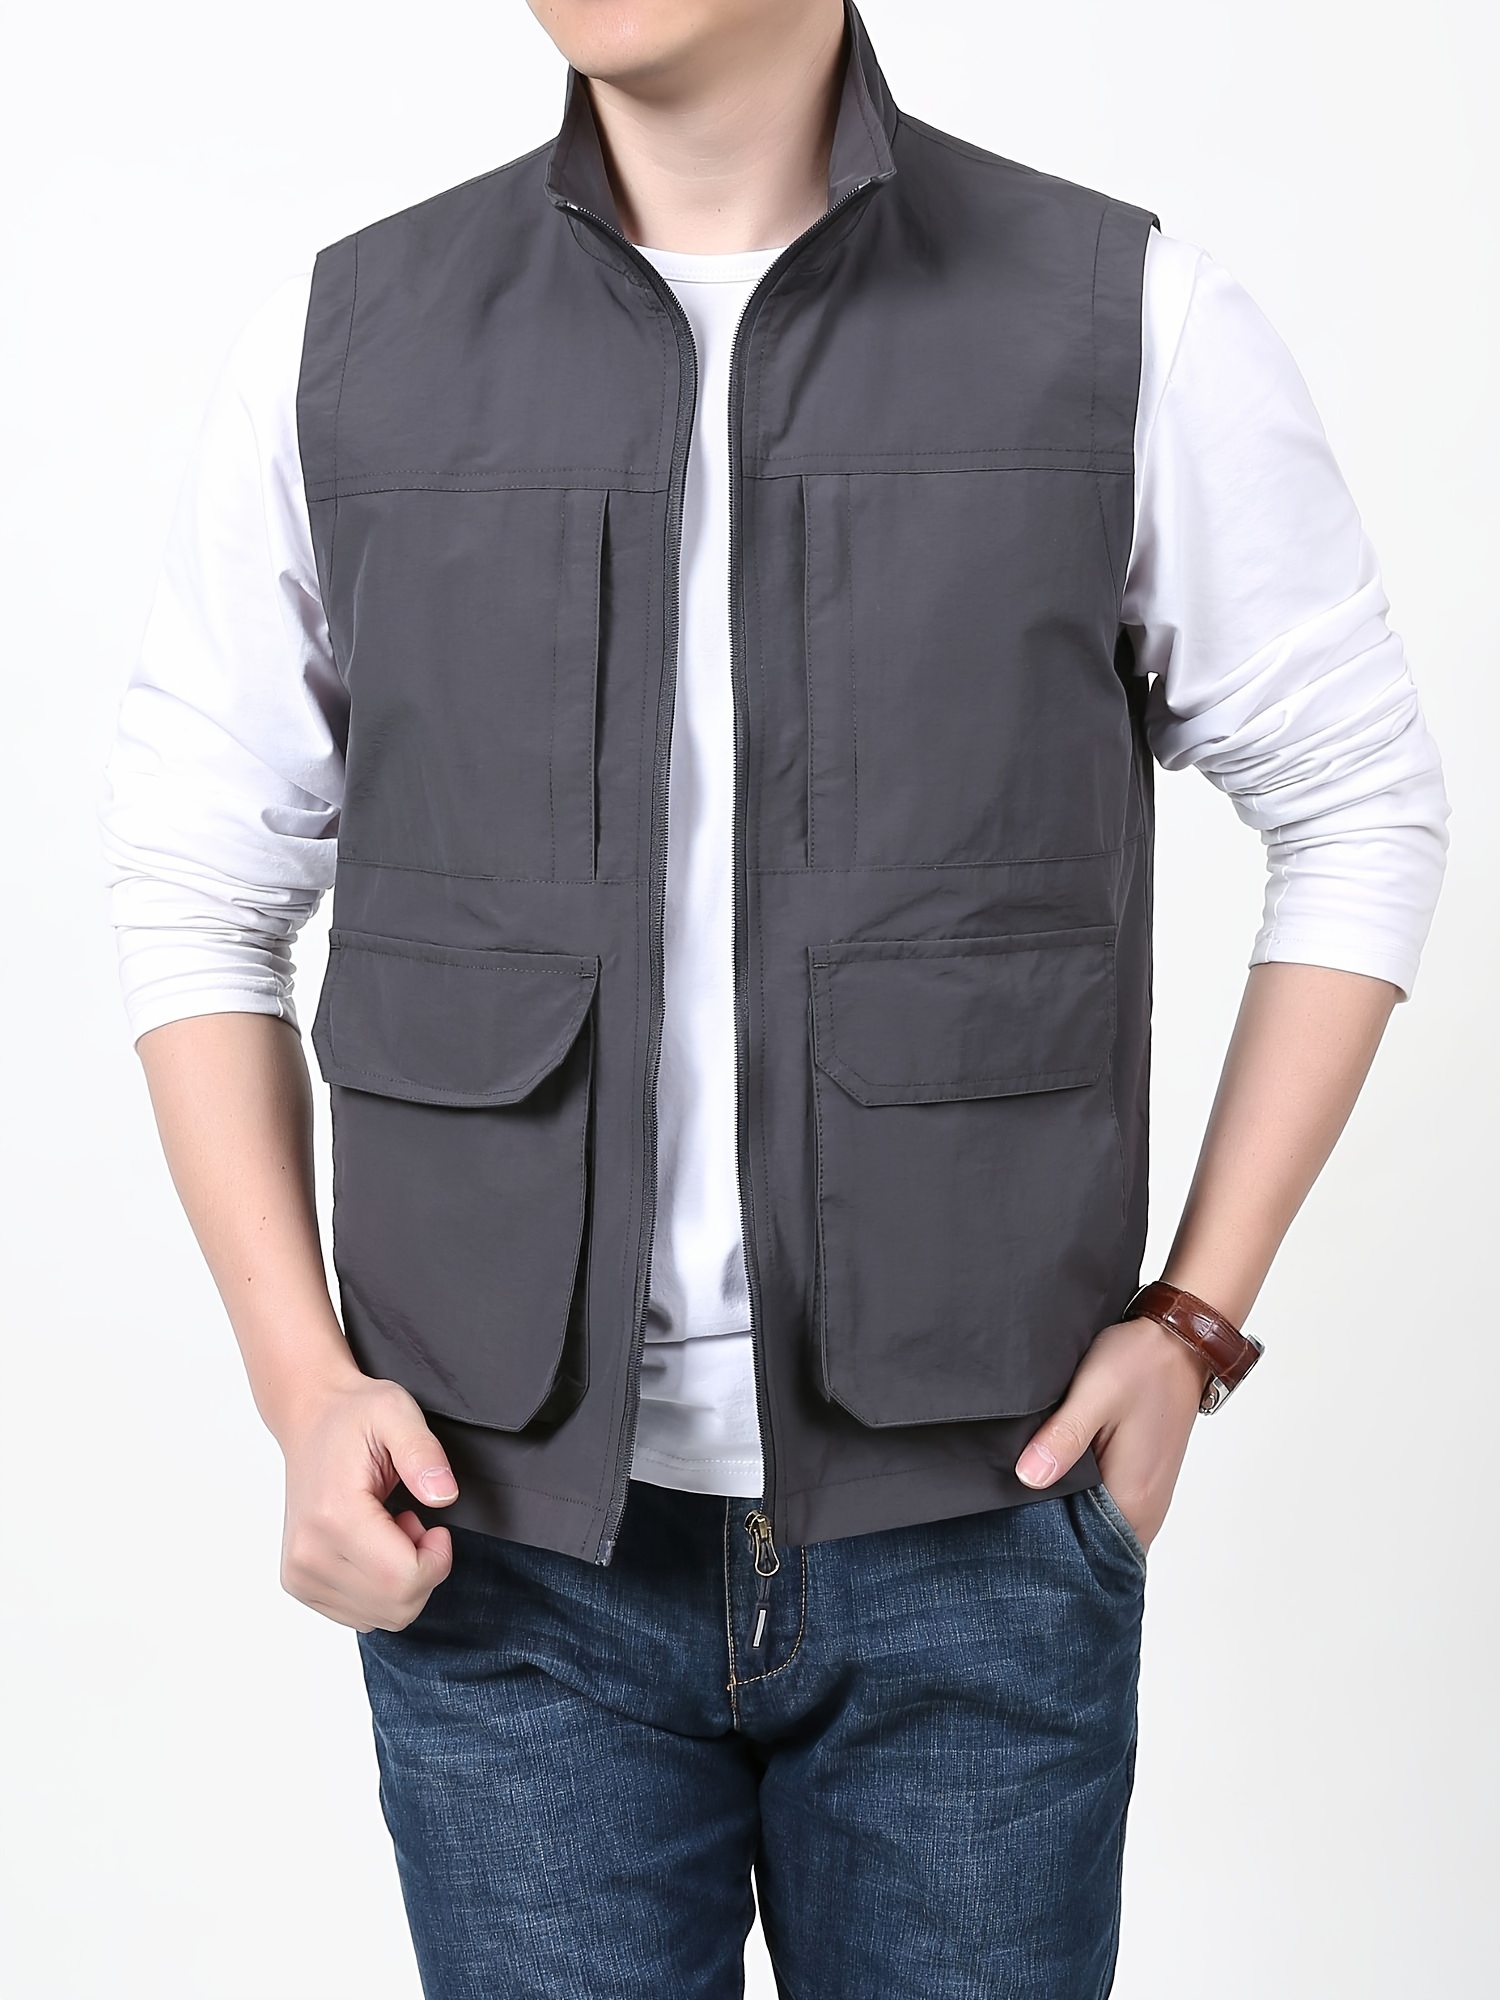 multi pockets cargo vest men s casual outwear stand collar